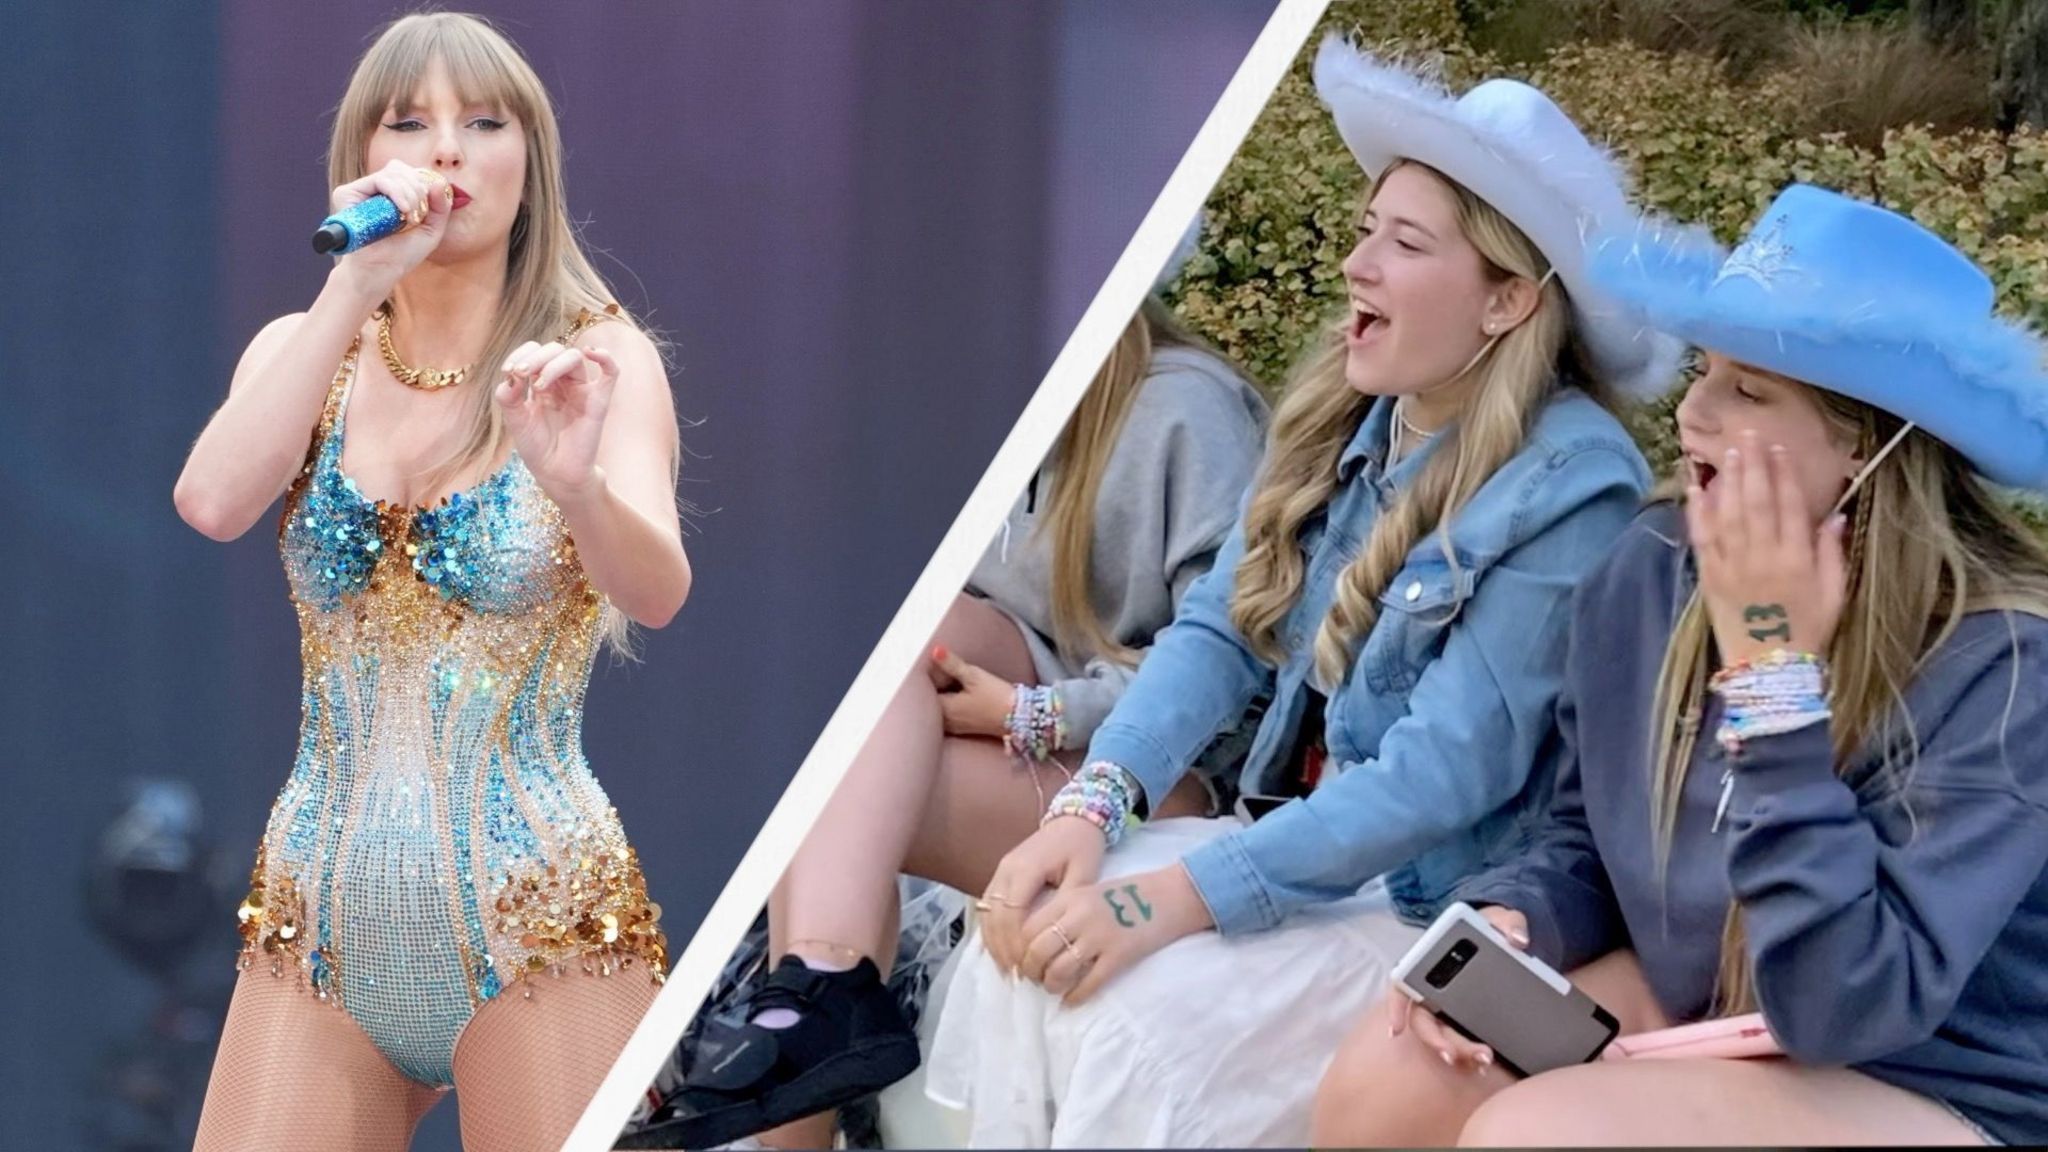 Split thumbnail: Taylor Swift performing at her Eras Tour in London, left, two fans wearing cowboy hats singing outside Wembley Stadium, right